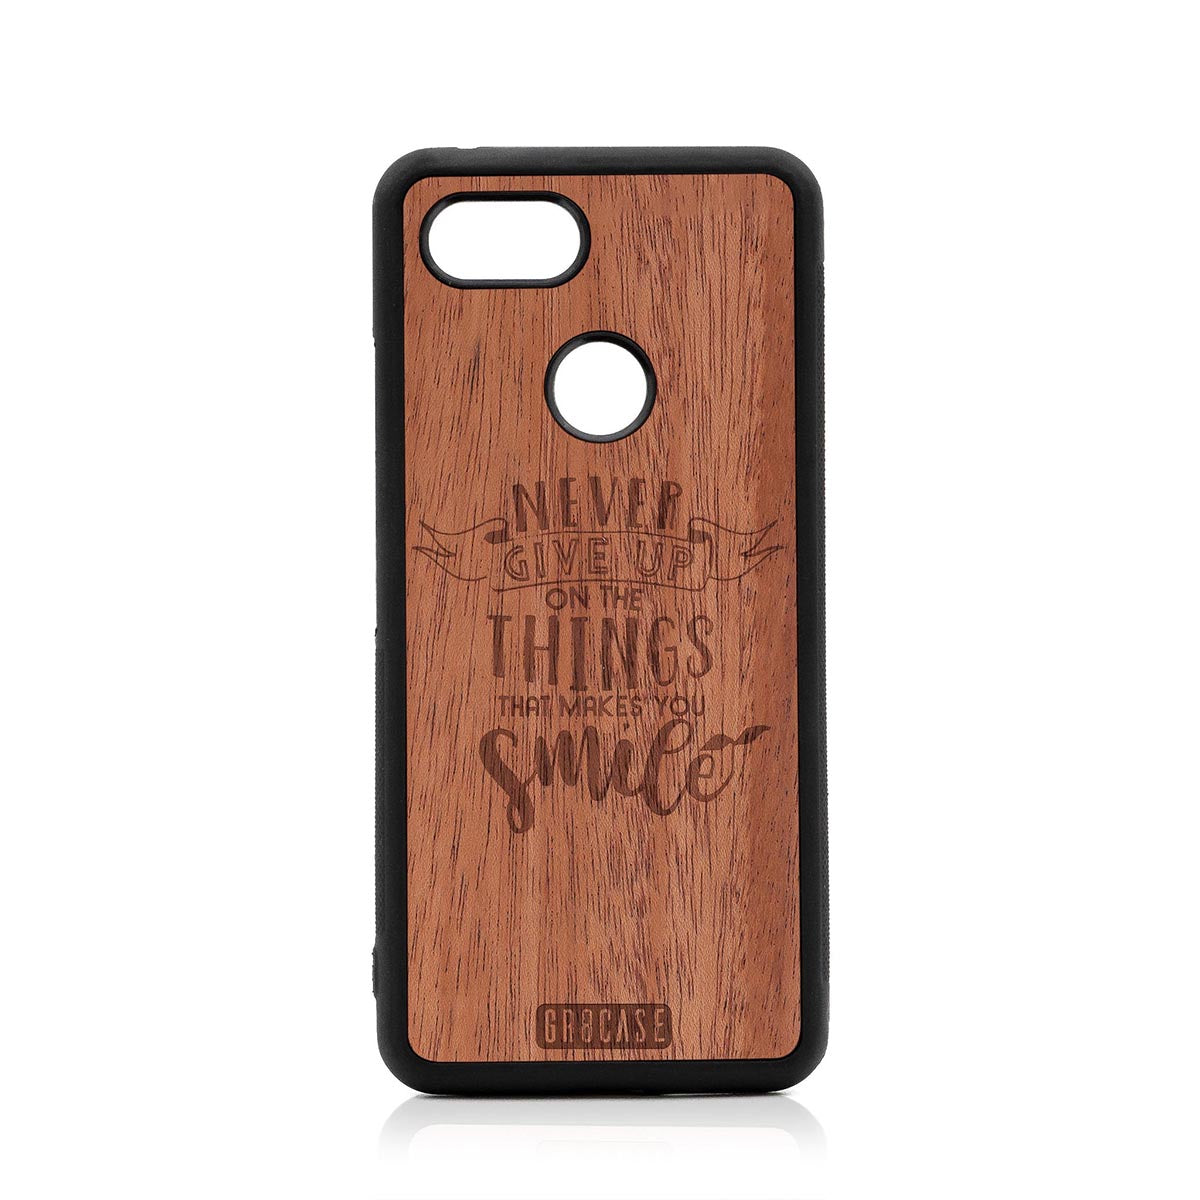 Never Give Up On The Things That Makes You Smile Design Wood Case Google Pixel 3 by GR8CASE